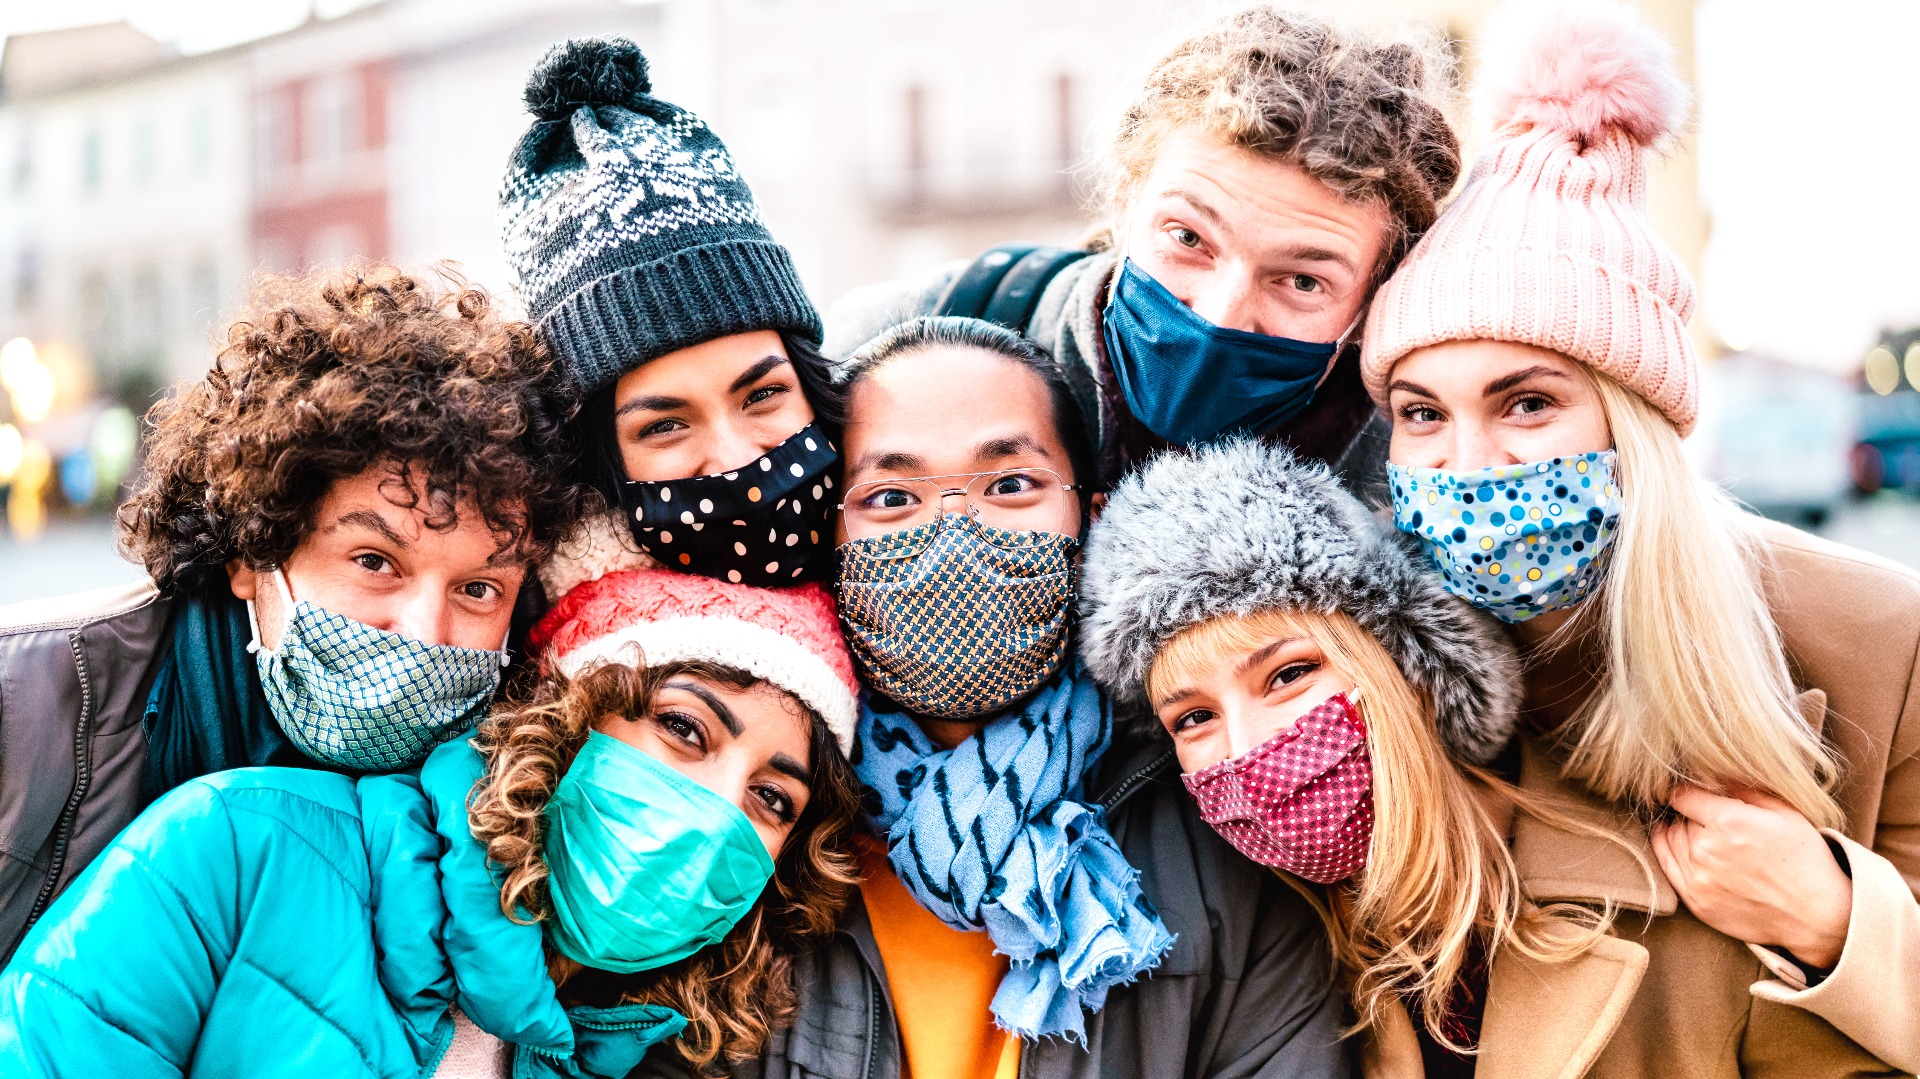 group of friends in masks in winter